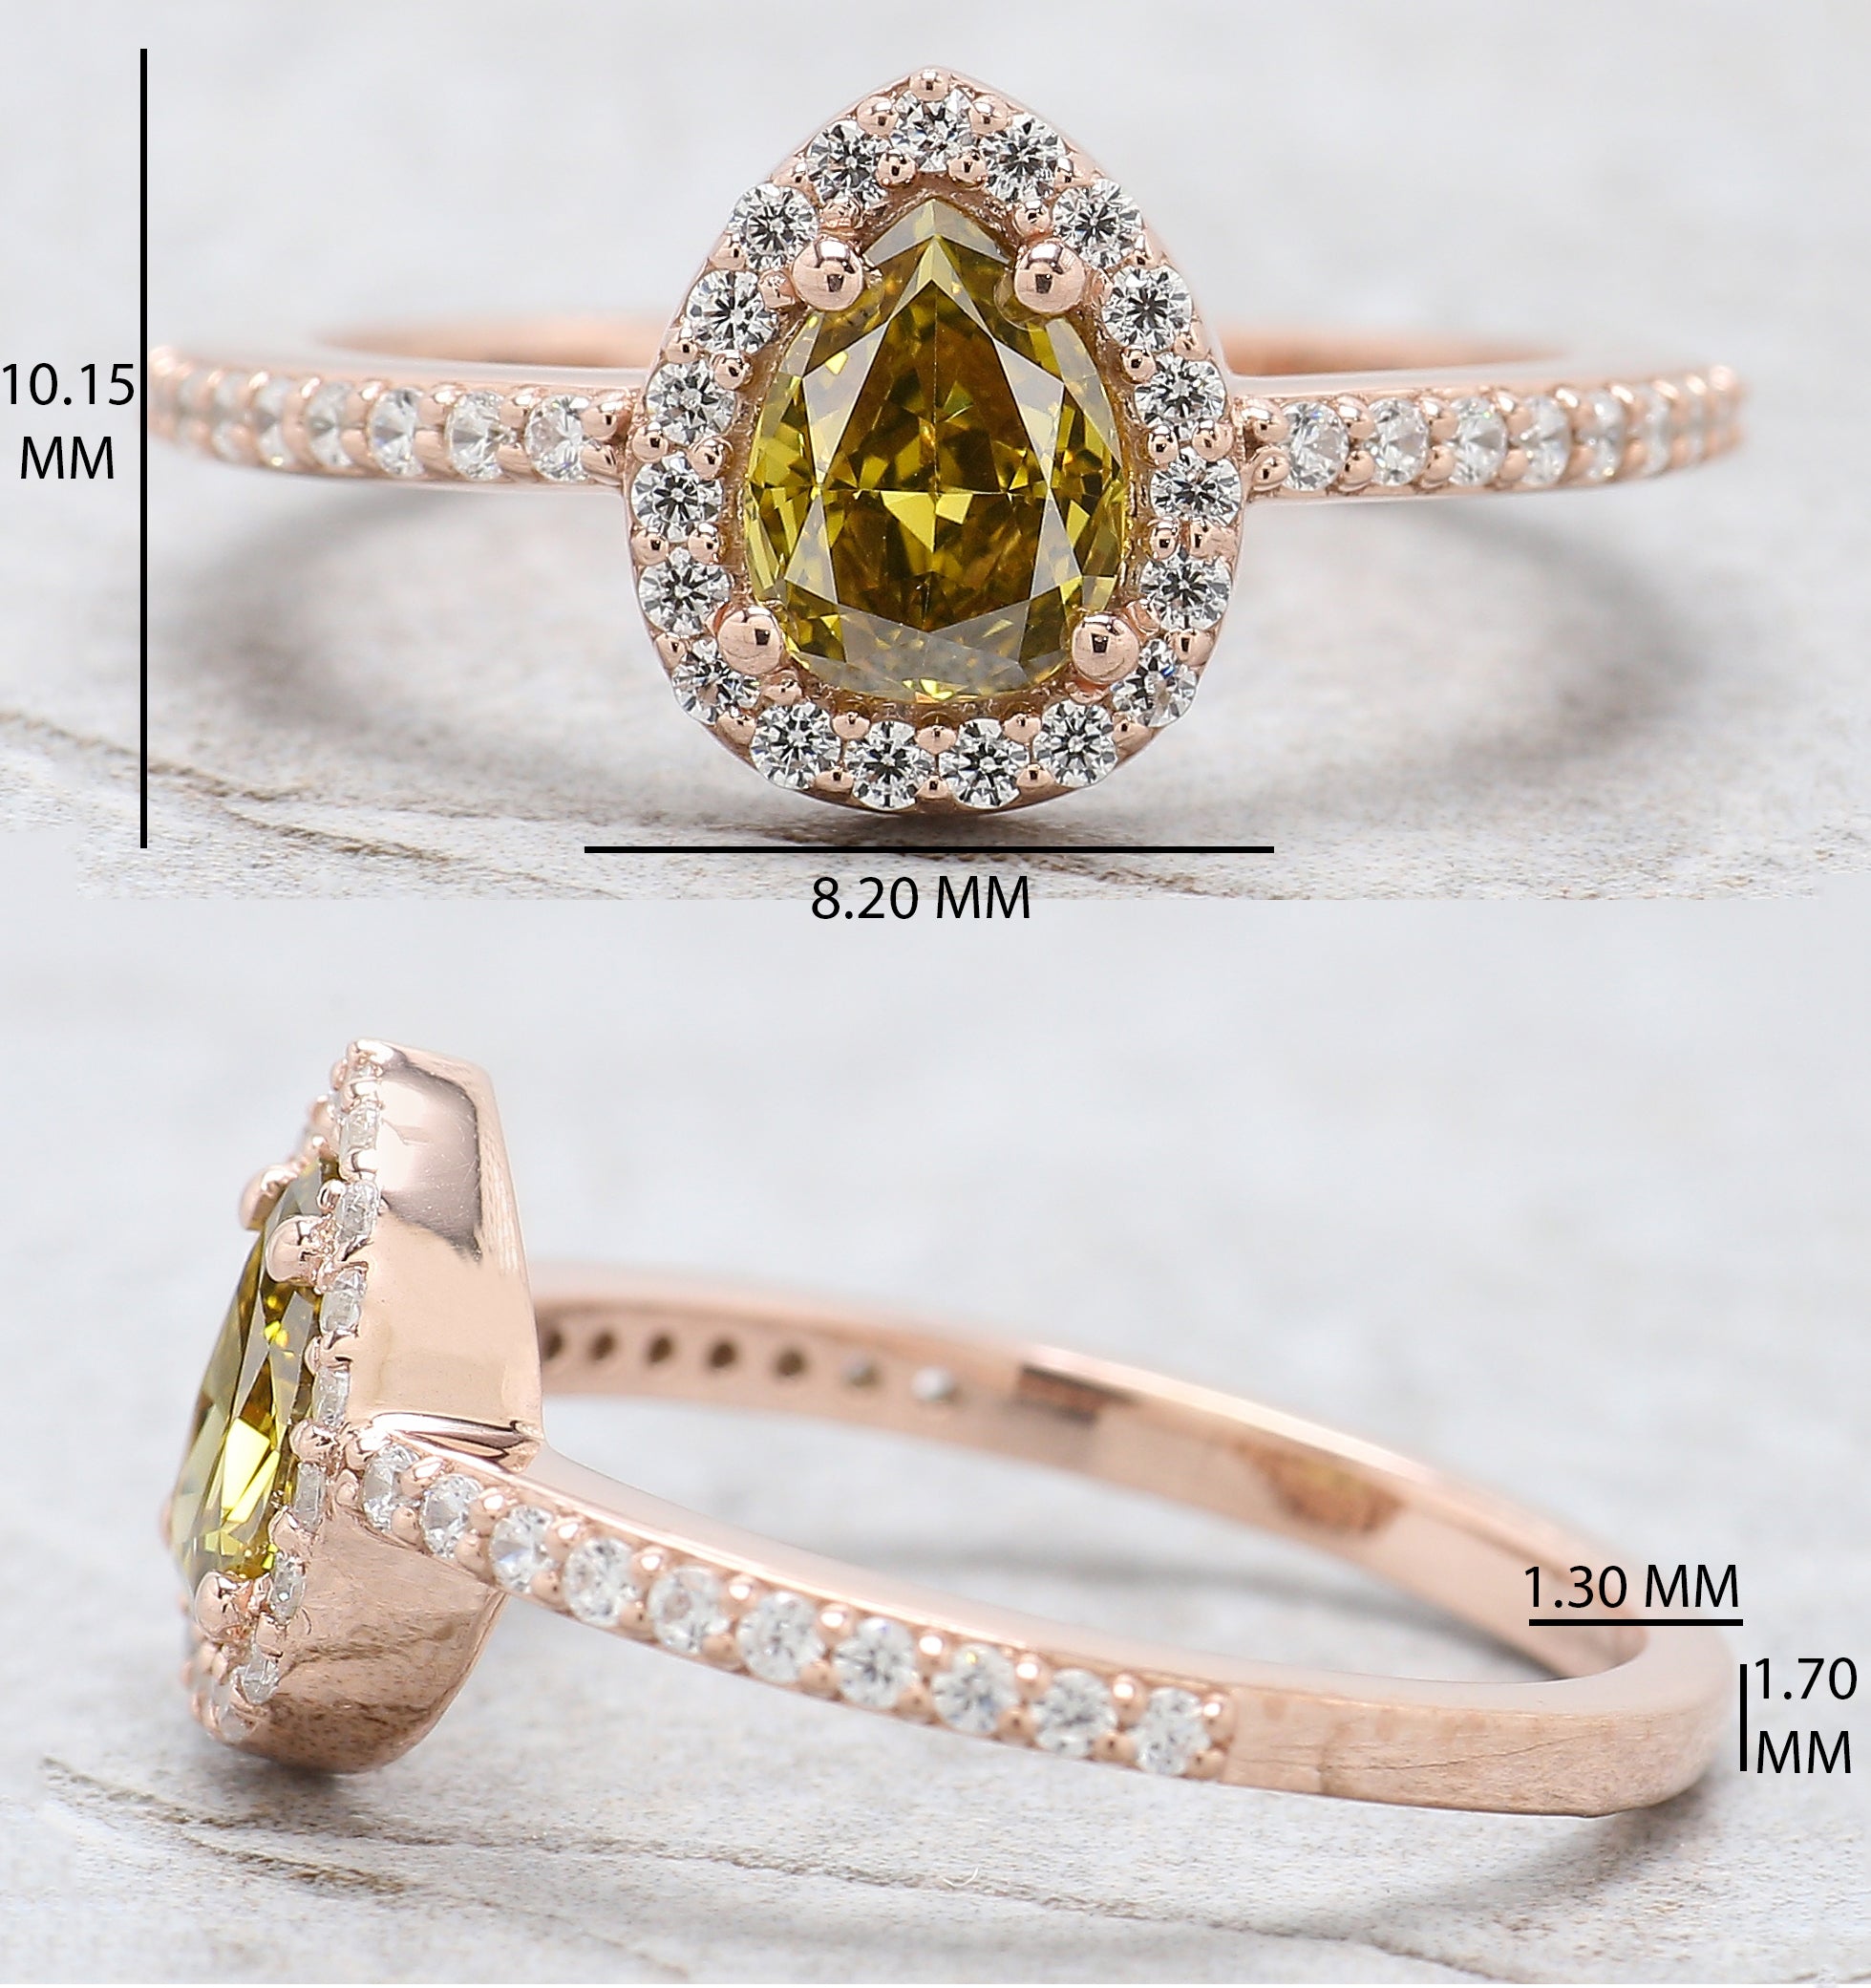 Pear Cut Green Color Diamond Ring 0.67 Ct 6.80 MM Pear Shape Diamond Ring 14K Solid Rose Gold Silver Engagement Ring Gift For Her QL6469